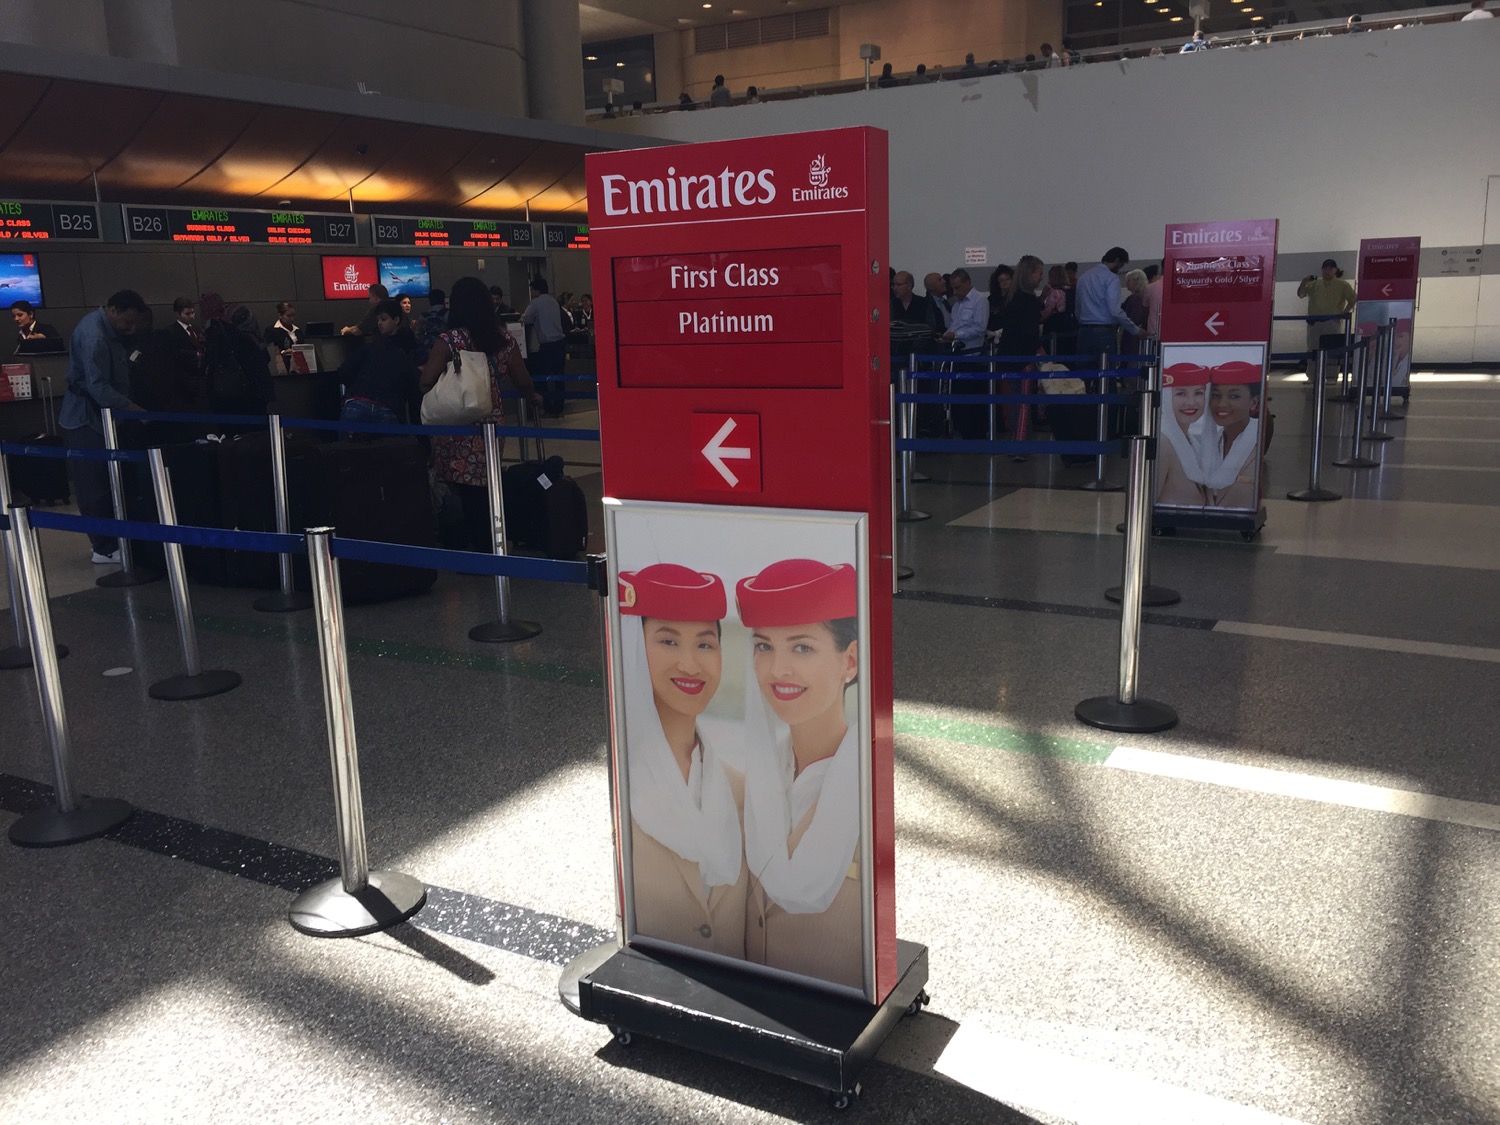 a red sign with a picture of a woman in a red hat